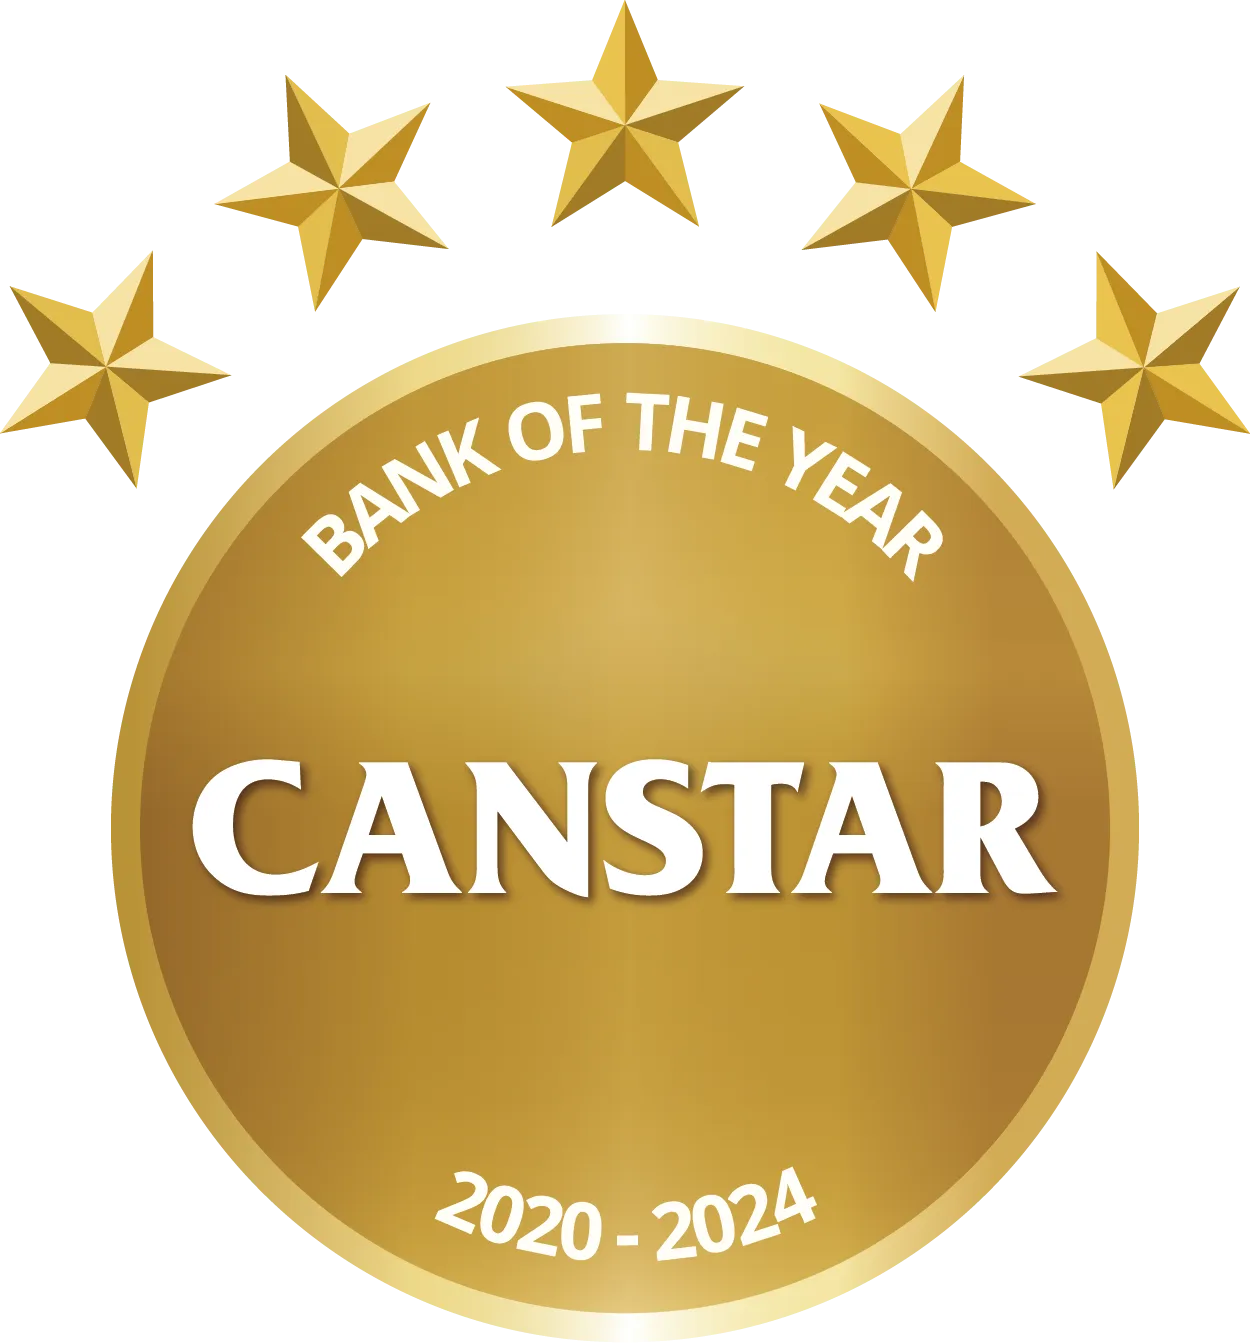 CANSTAR 2020 - 2024 Bank of the Year